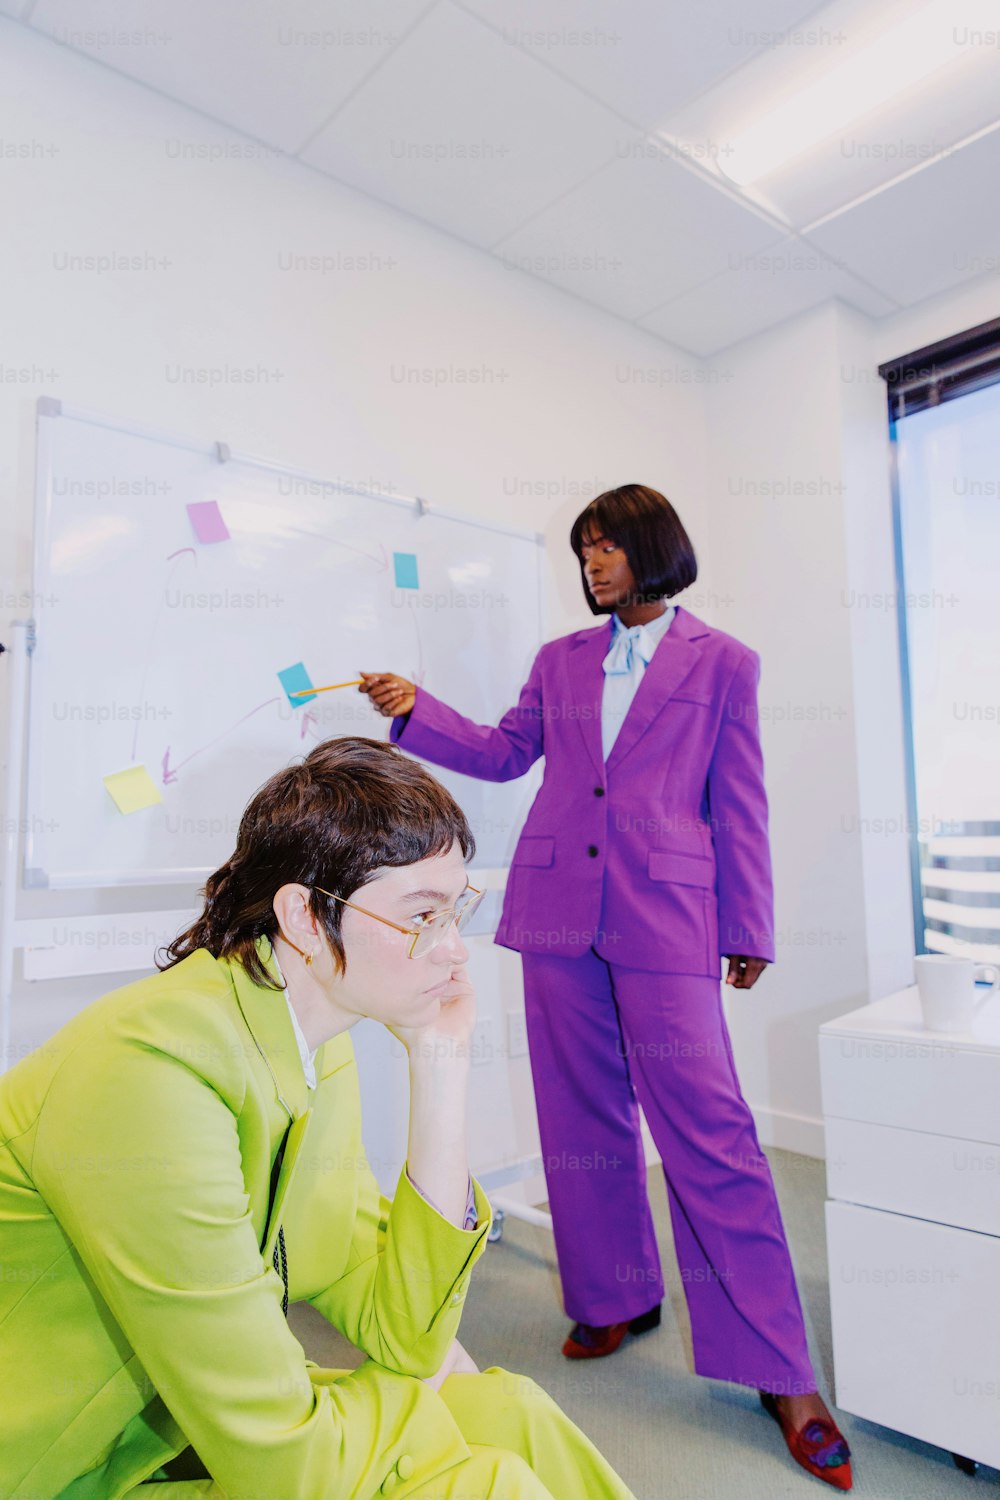 a woman in a purple suit standing next to a whiteboard